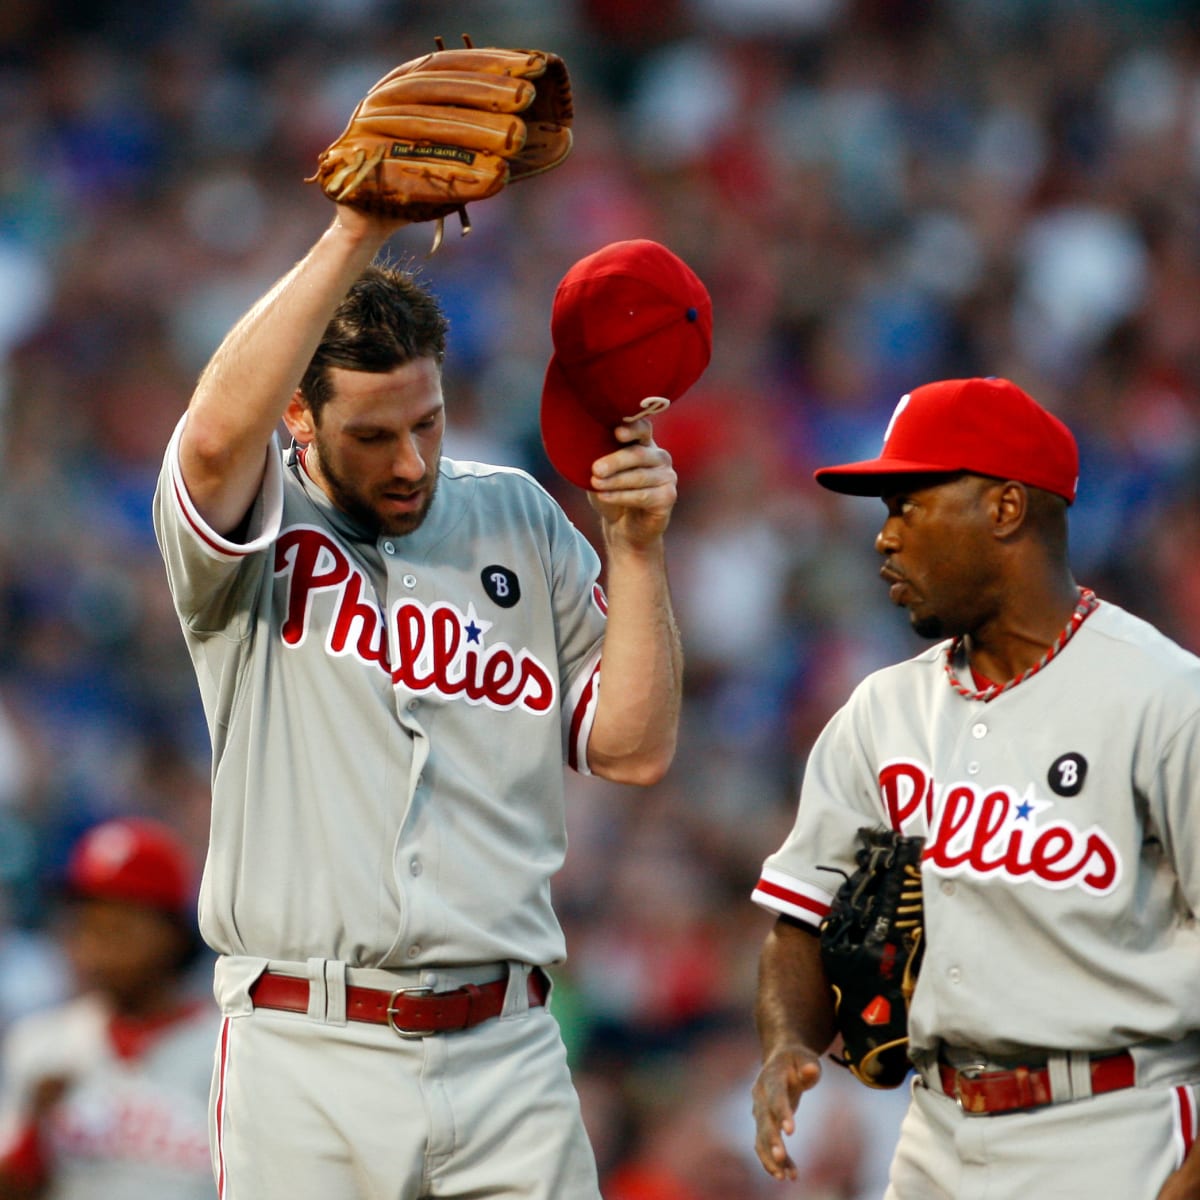 How Unwritten Philadelphia Phillies Clubhouse Rules Caused a Fight